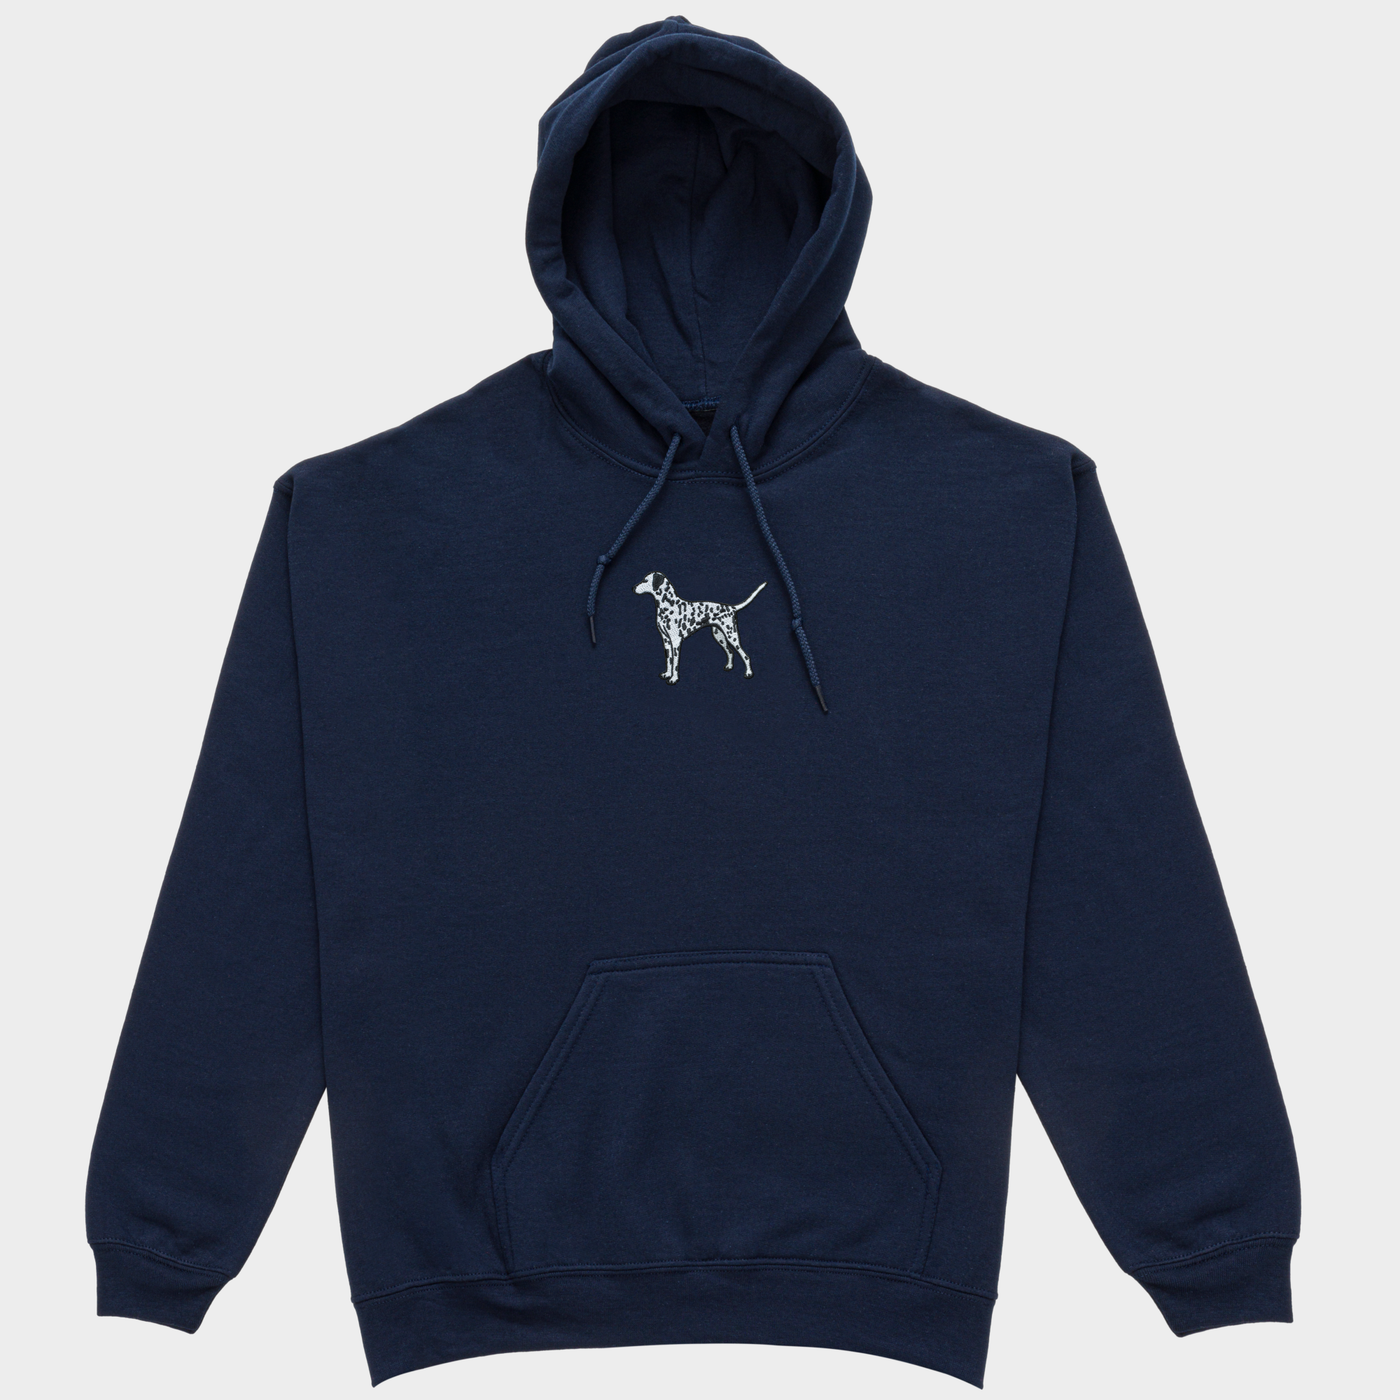 Bobby's Planet Men's Embroidered Dalmatian Hoodie from Paws Dog Cat Animals Collection in Navy Color#color_navy